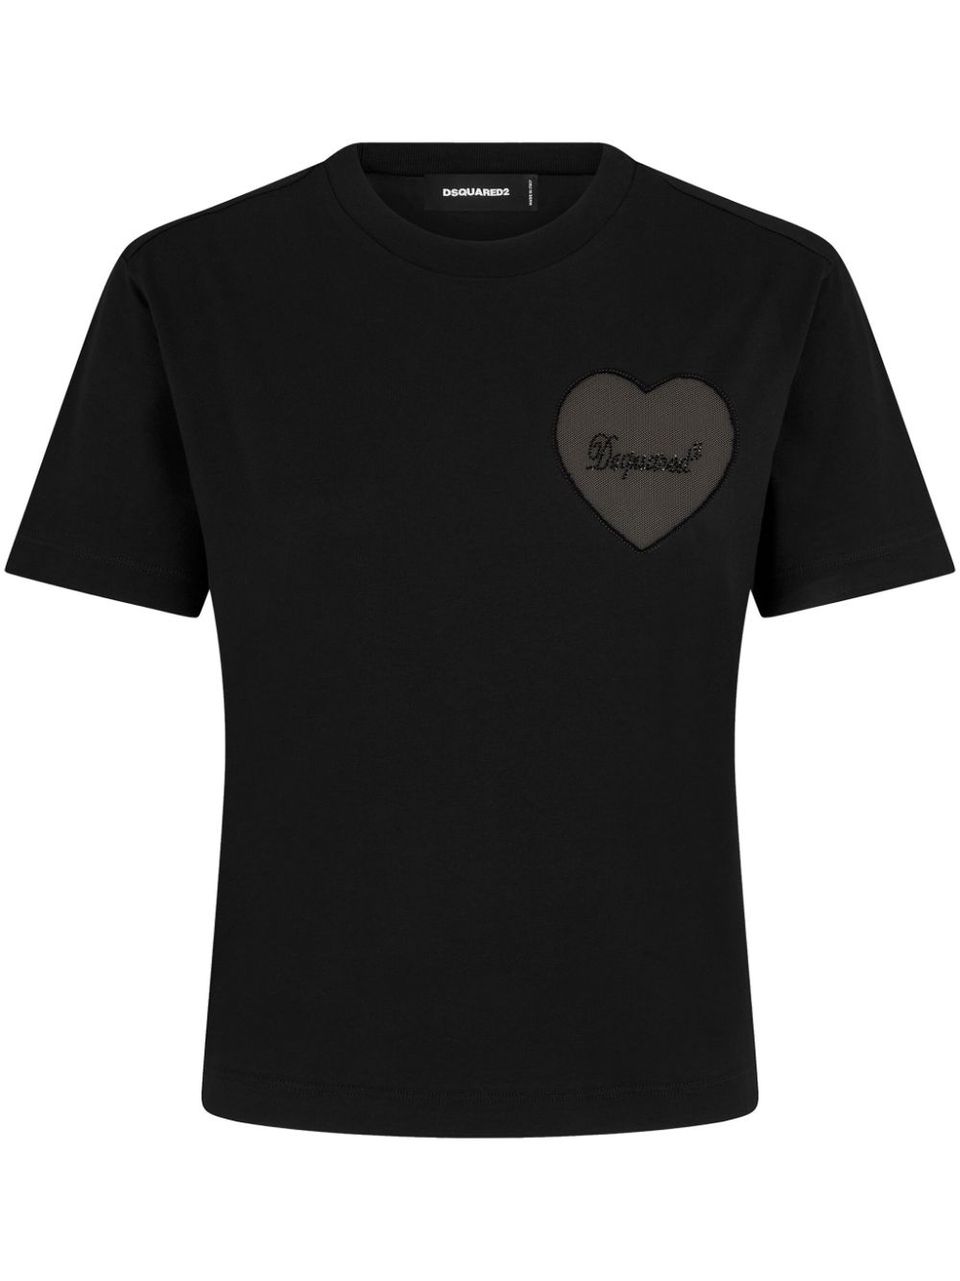 T-shirt cuore